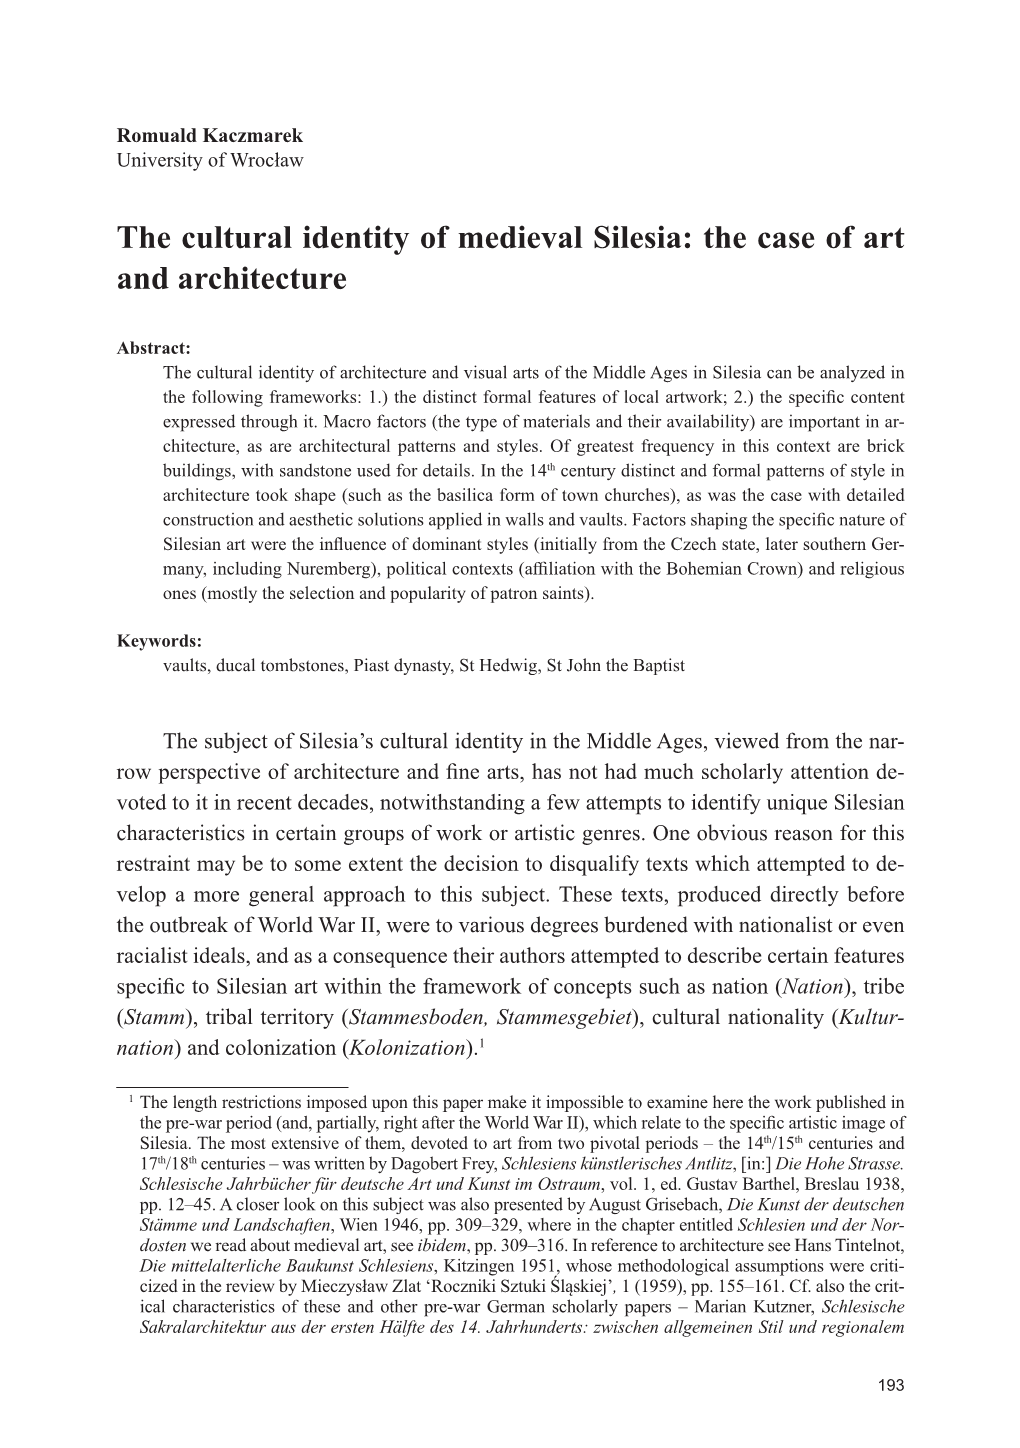 The Cultural Identity of Medieval Silesia: the Case of Art and Architecture